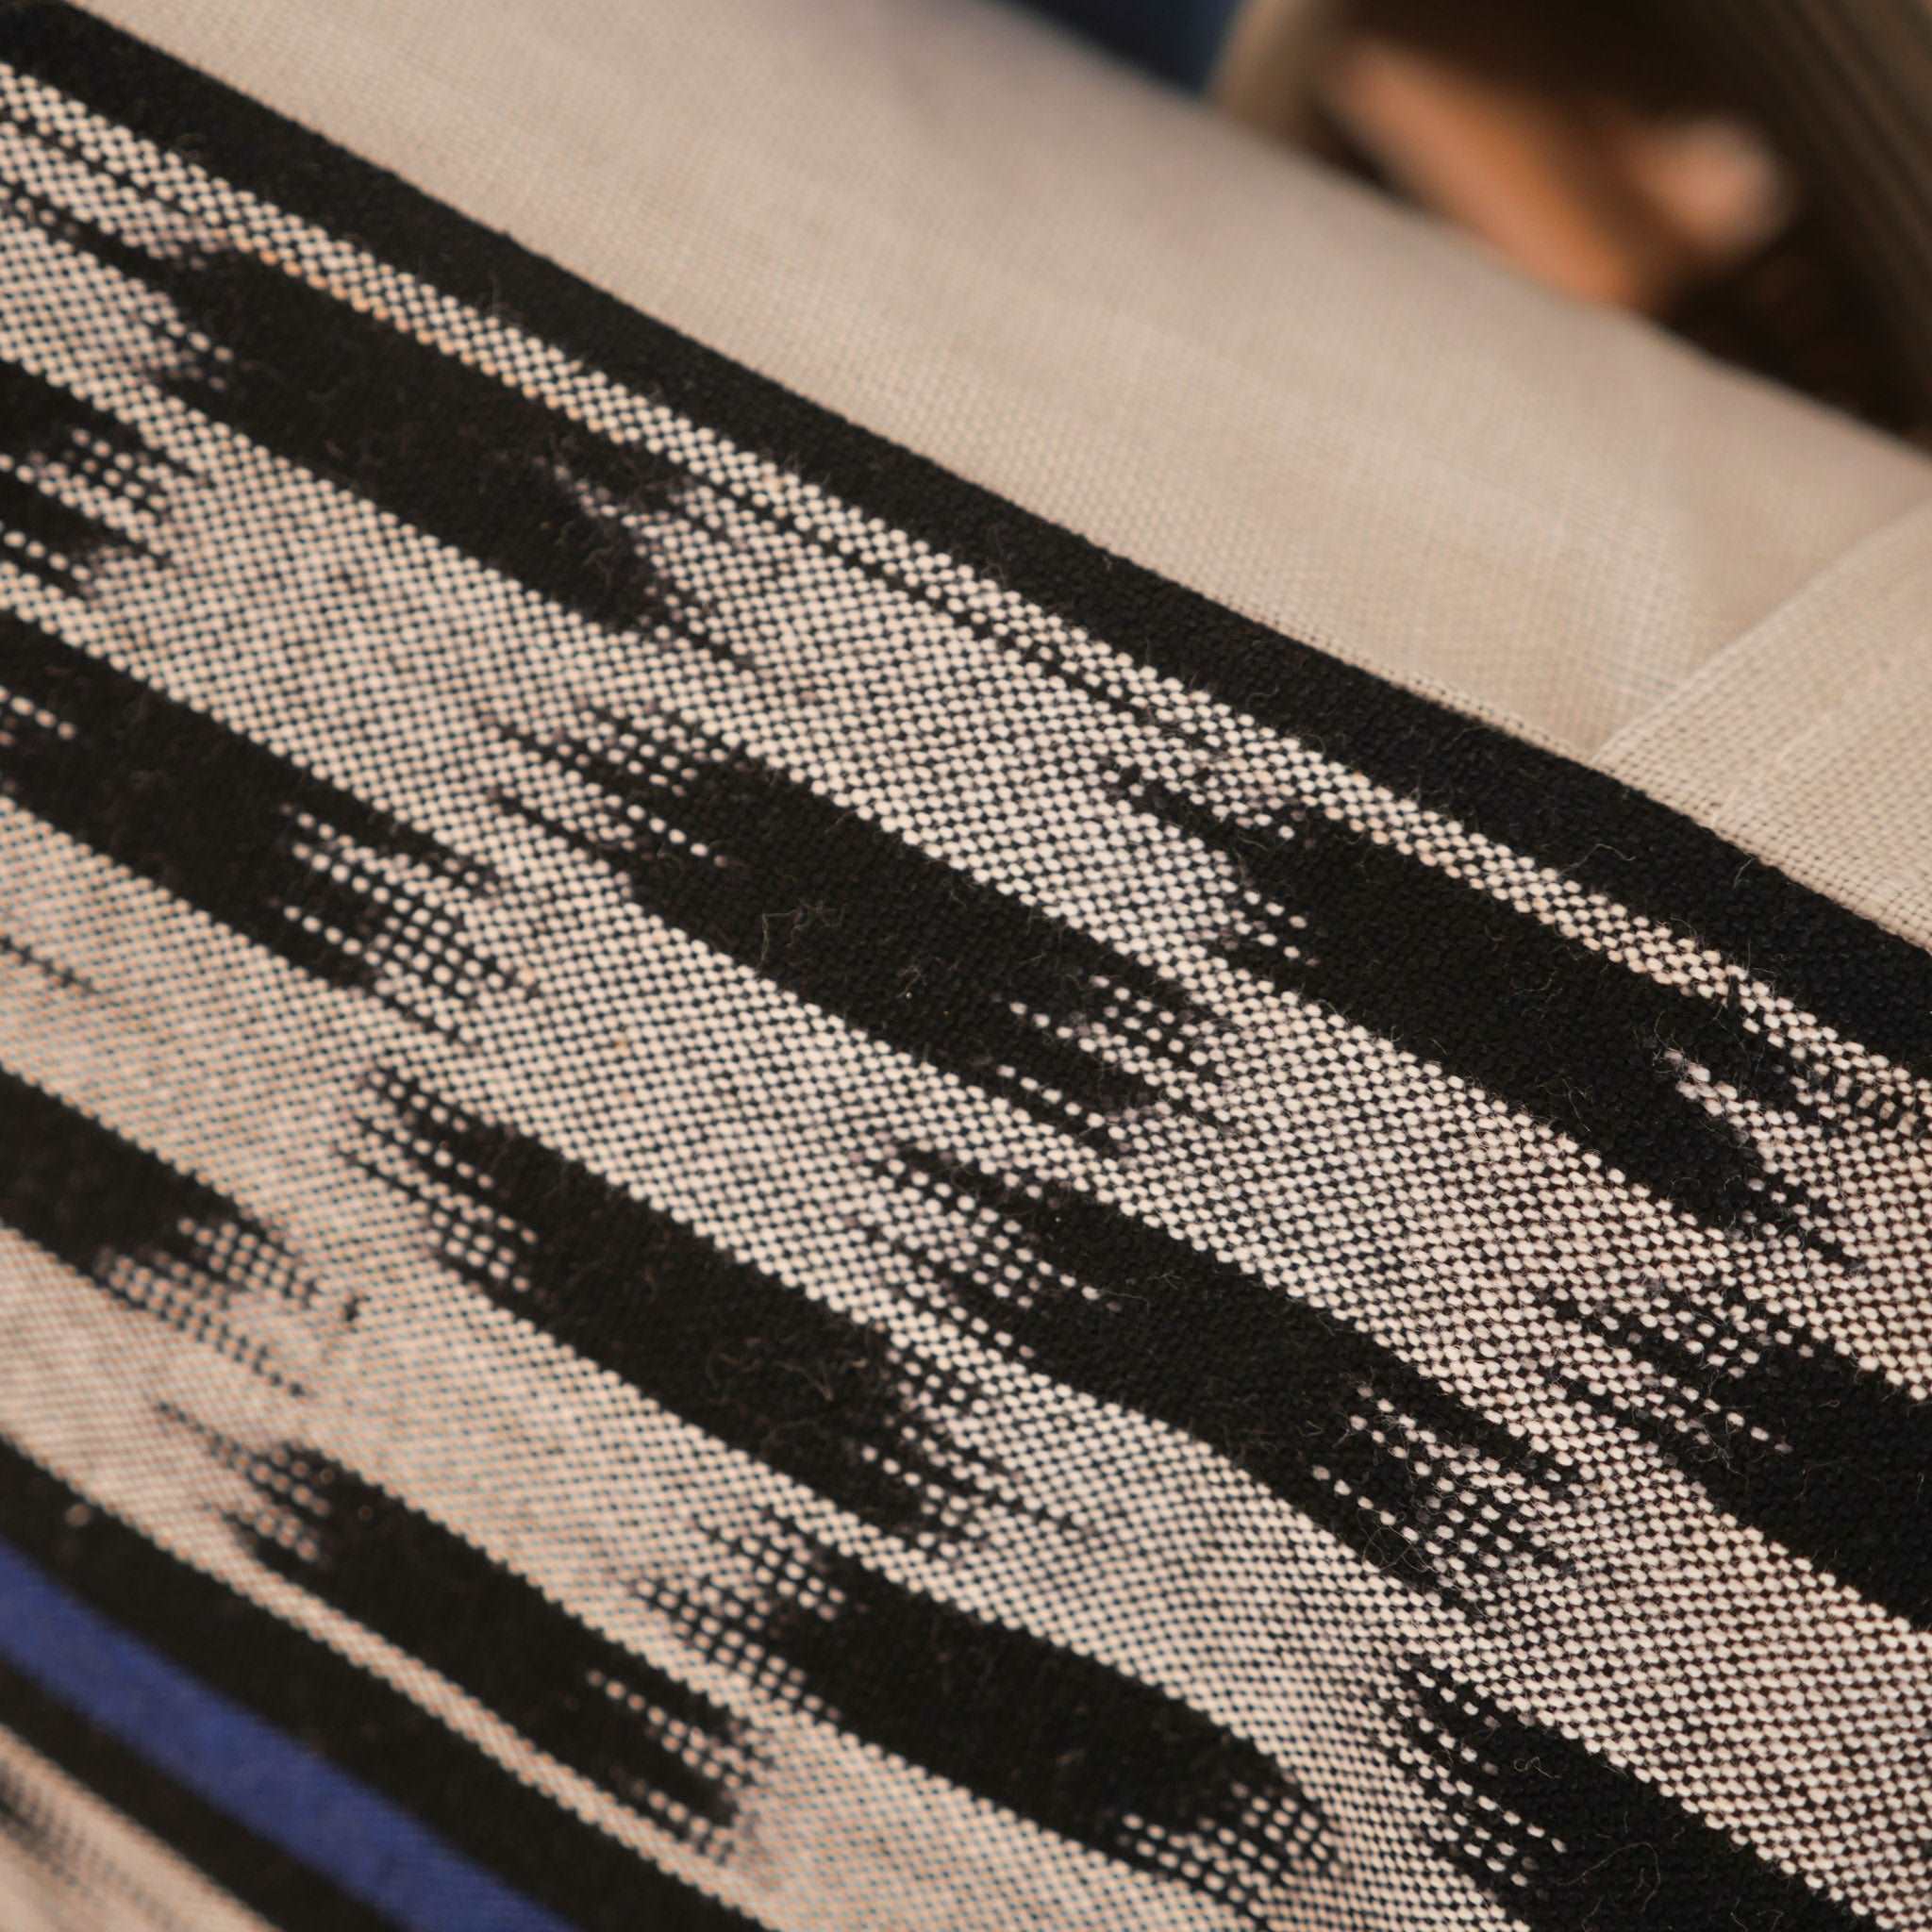 Luxurious cushions are handmade in Paris for Storie from a beautiful, thick, hand-woven cotton in Burkina Faso.